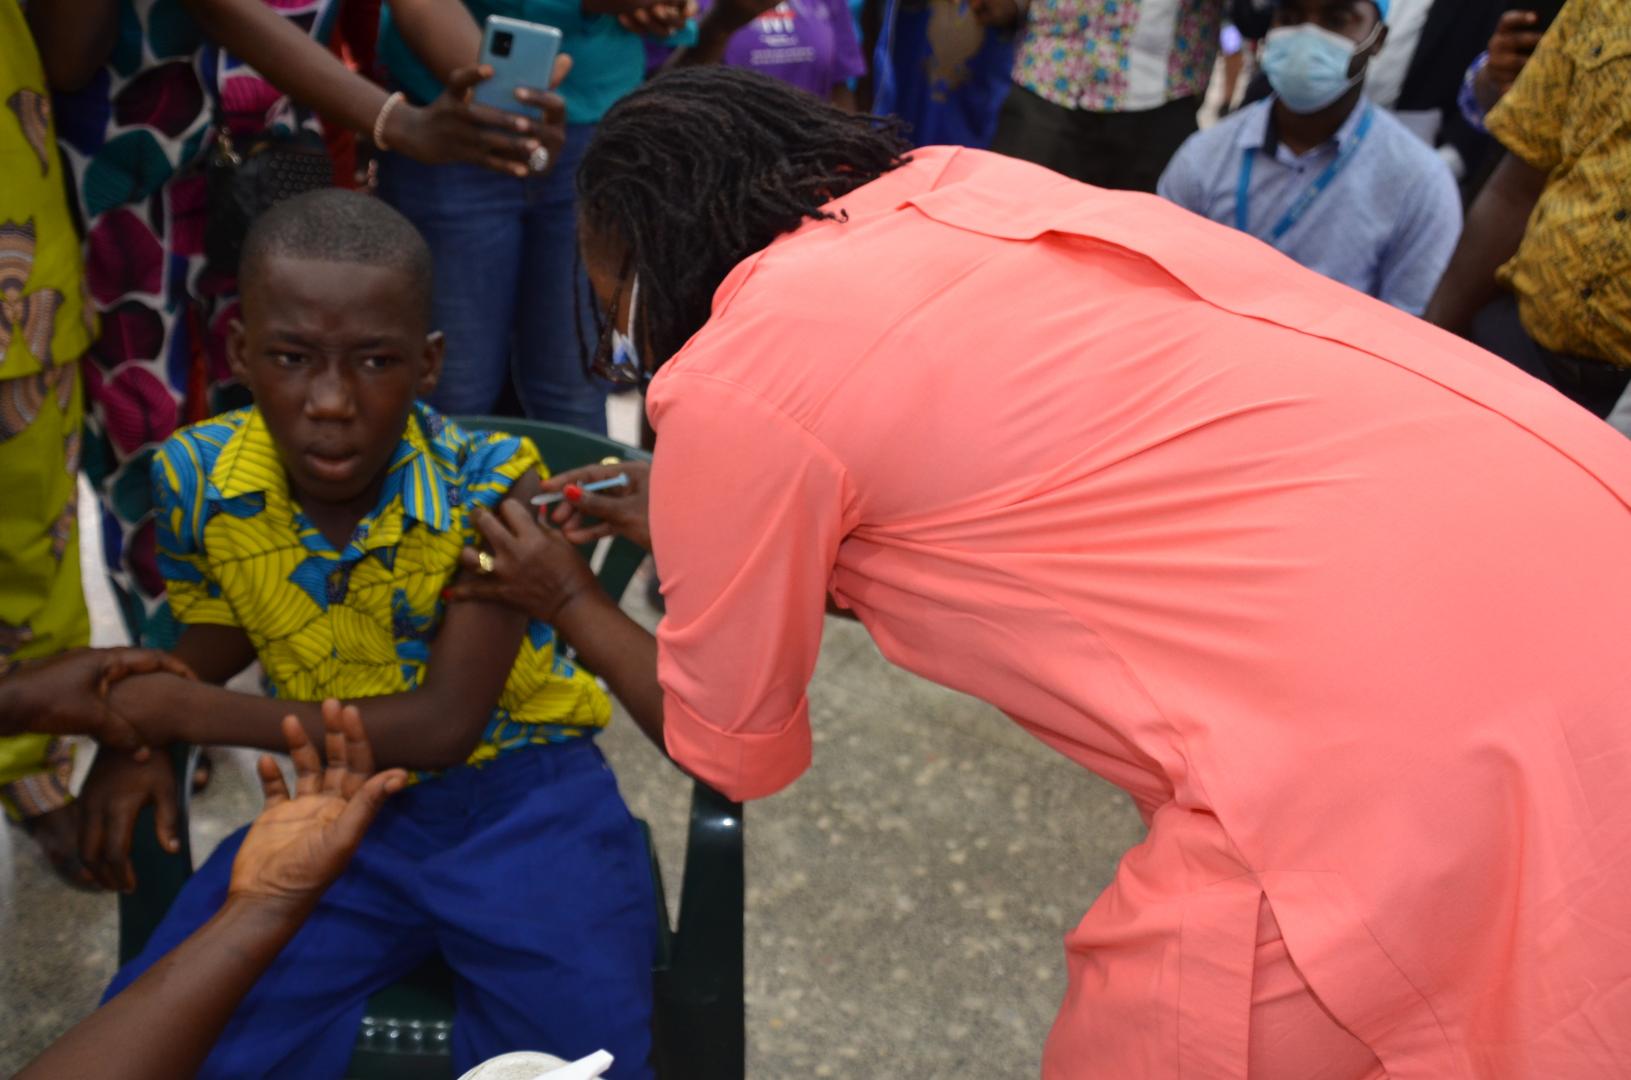 Health Minister, Dr. Jallah vaccinating first child during the TCV launch in Monrovia